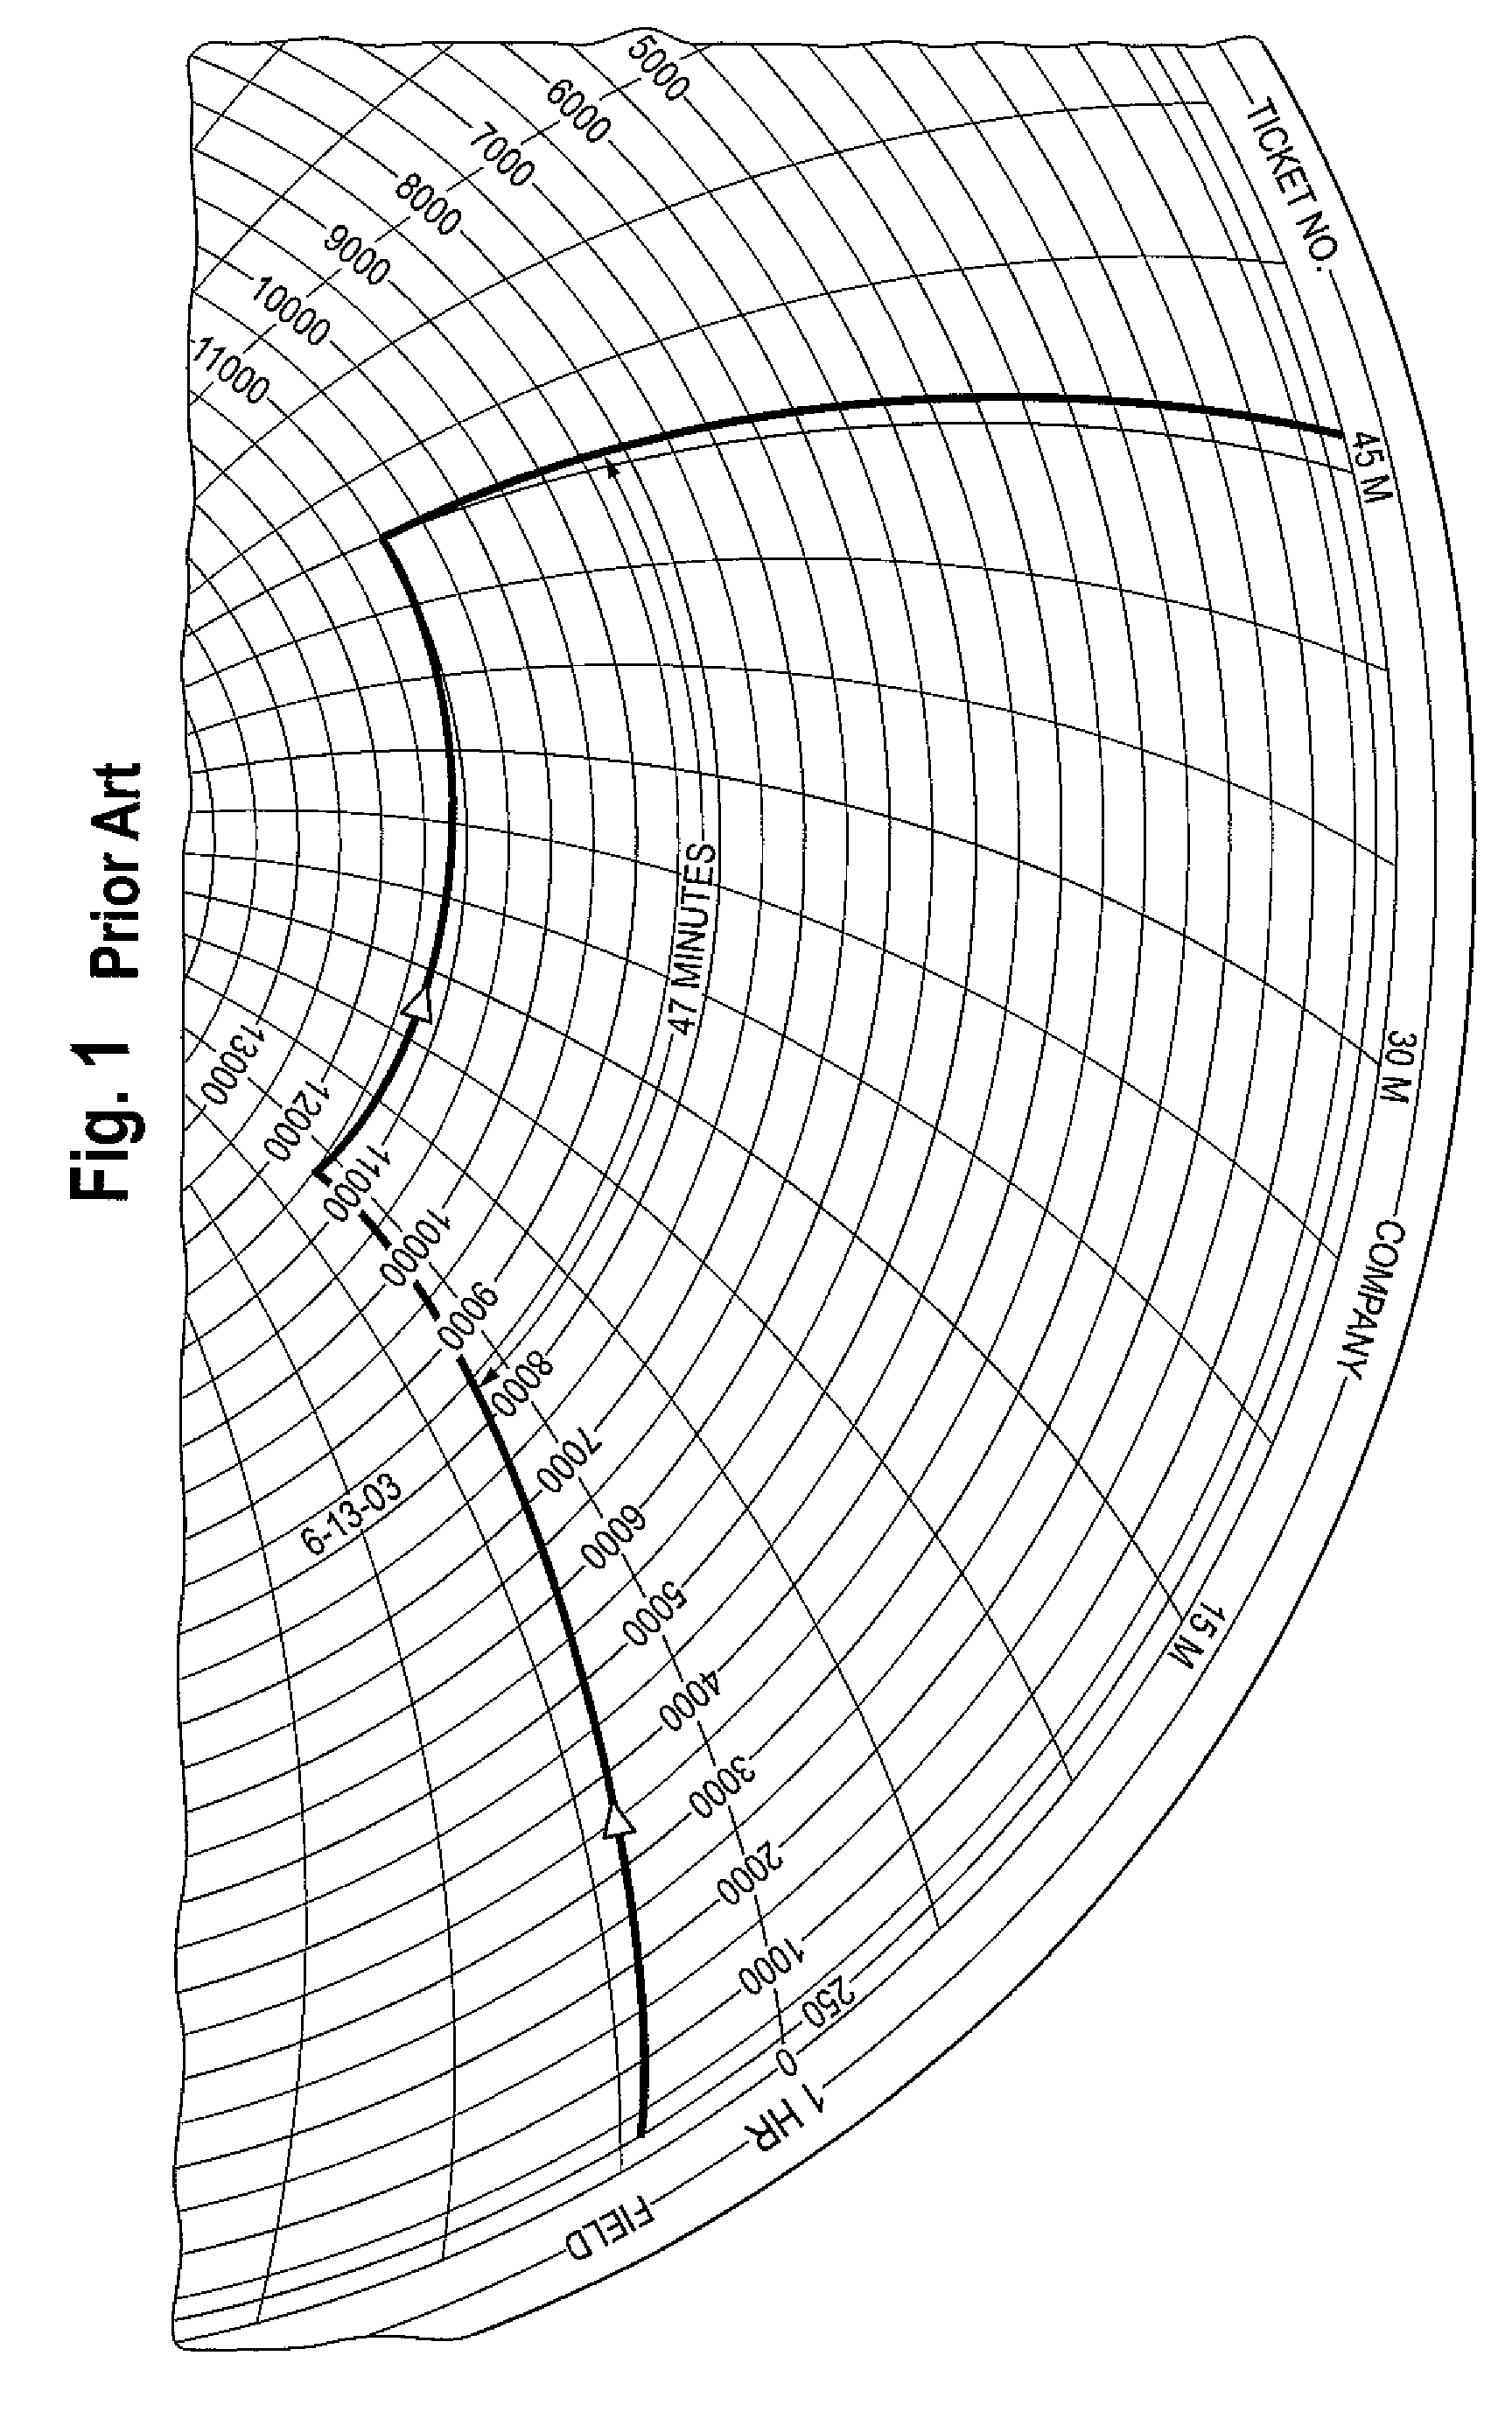 Improved blowout preventer testing system and method